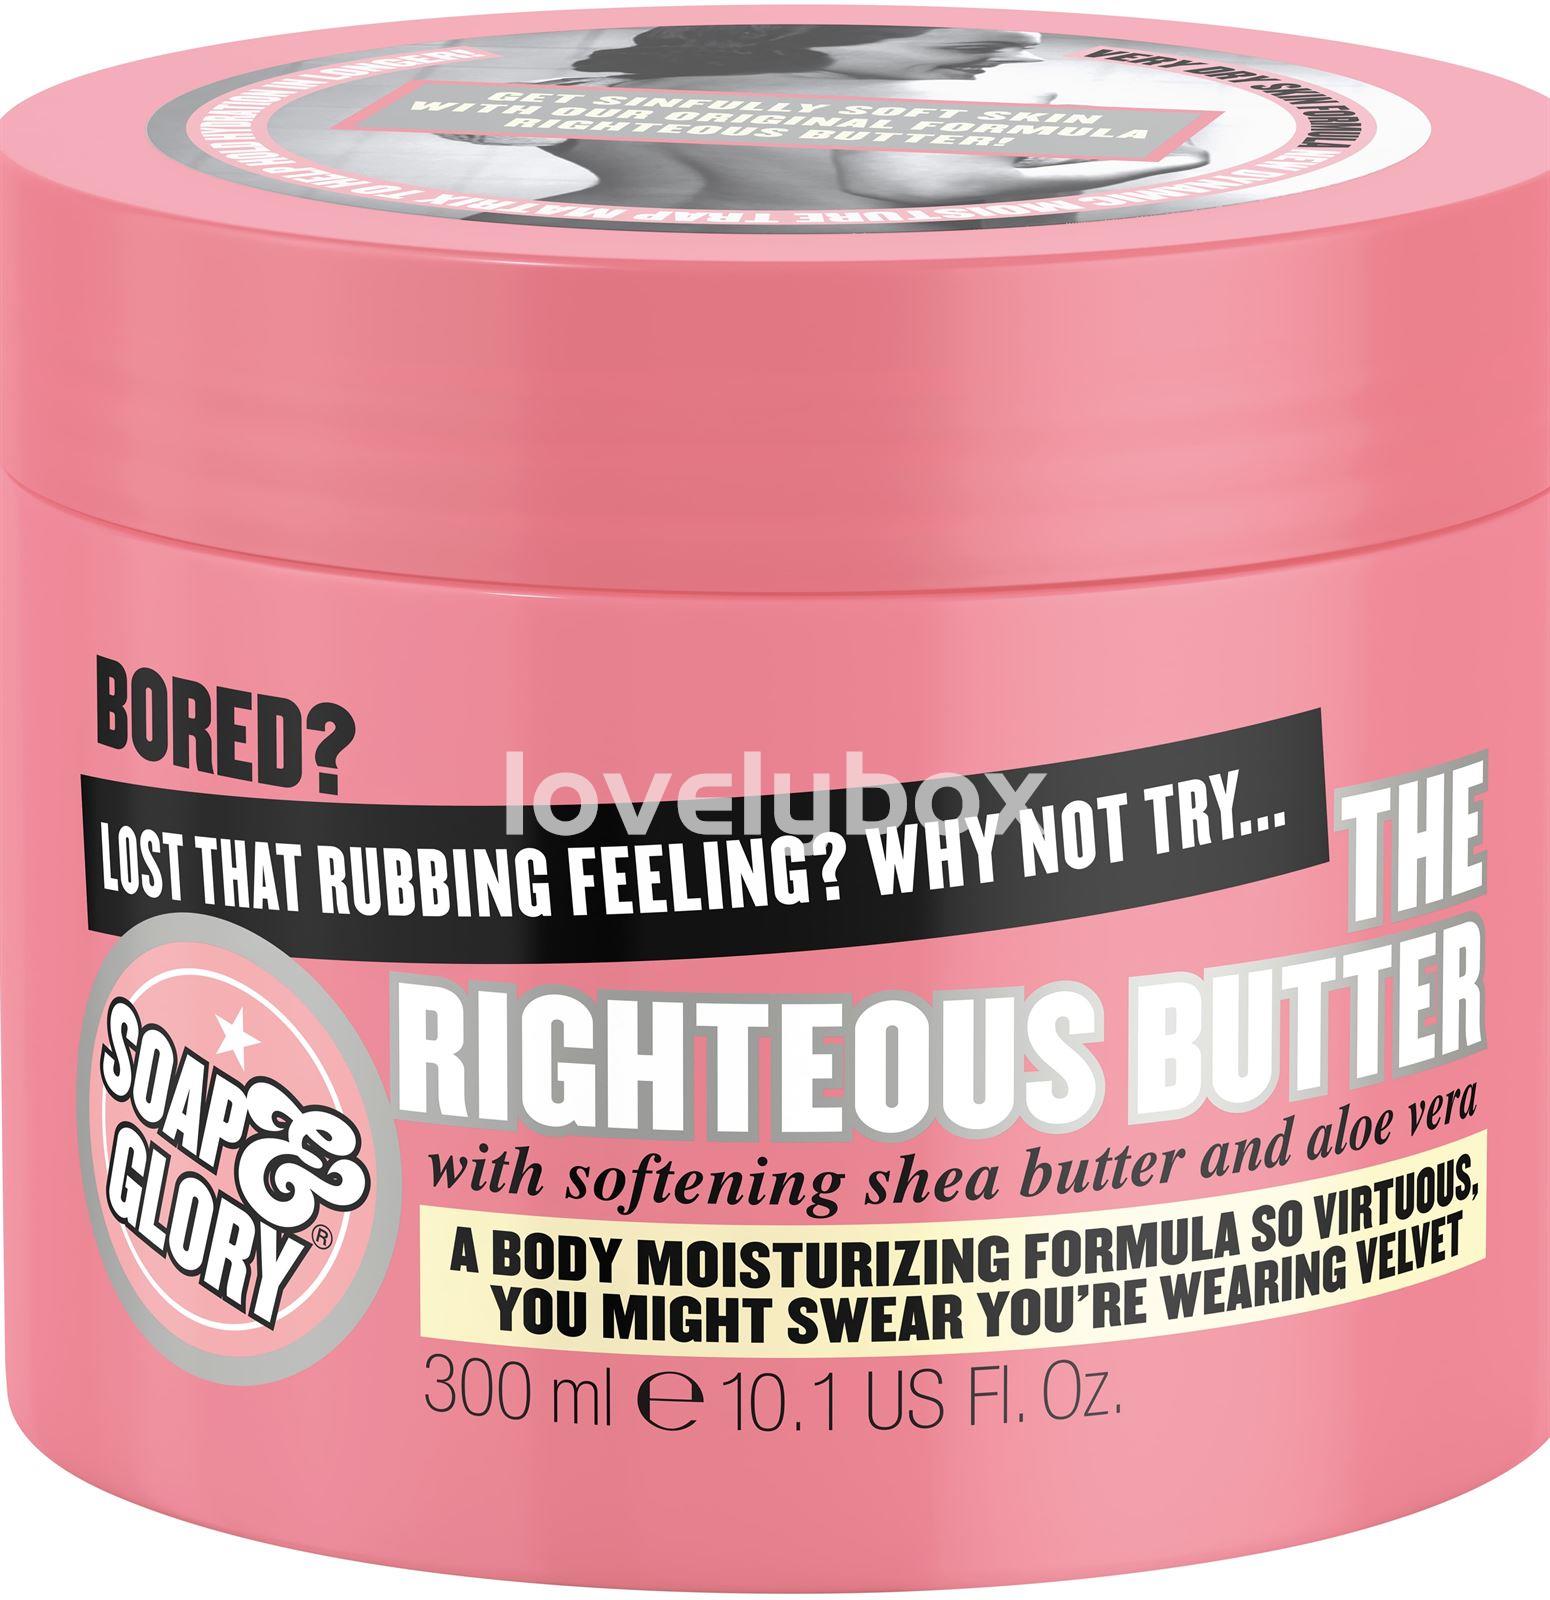 Manteca corporal THE RIGHTEOUS soap&glory - Imagen 1